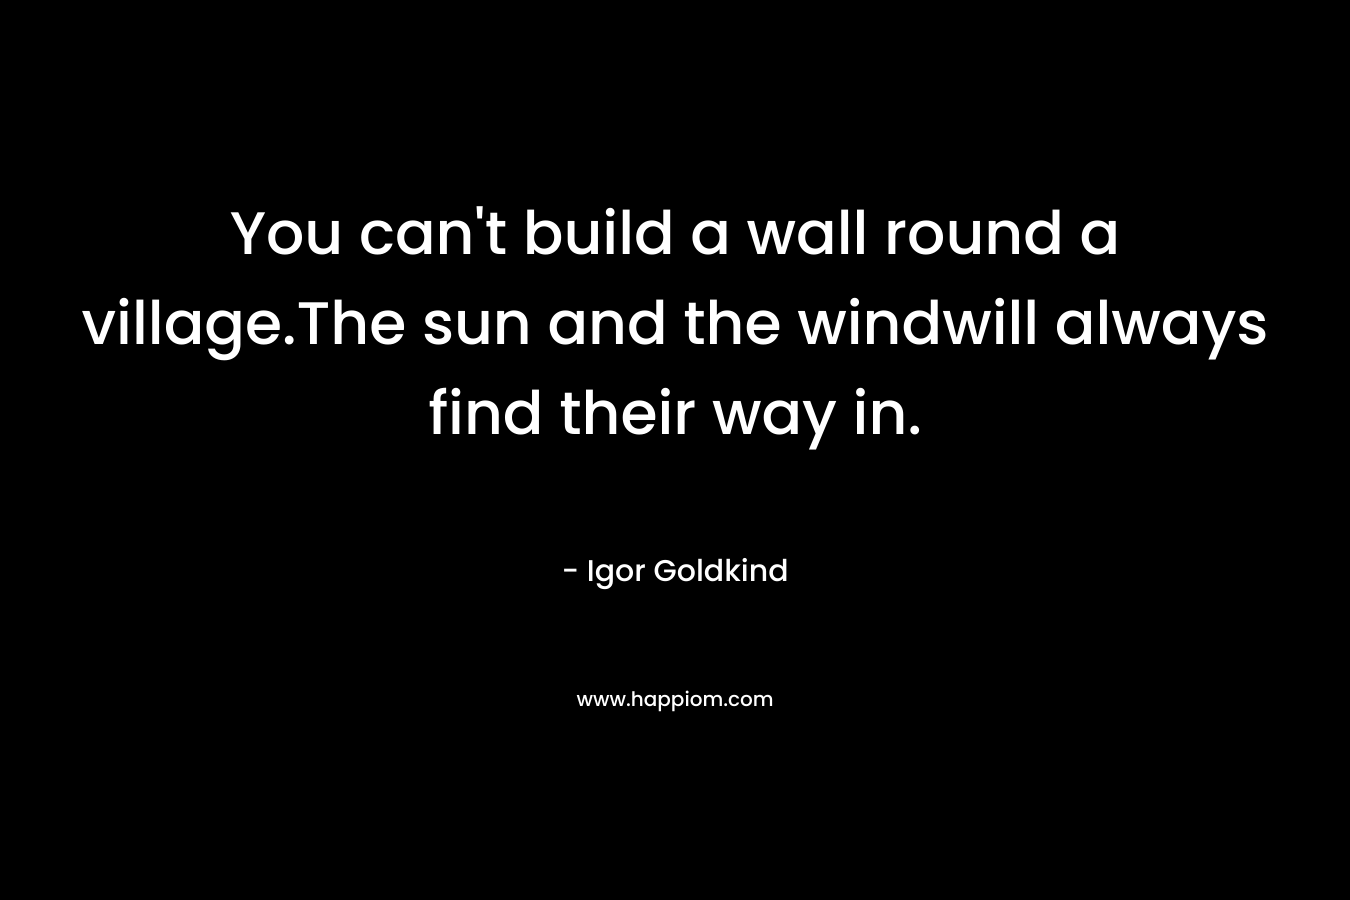 You can’t build a wall round a village.The sun and the windwill always find their way in. – Igor Goldkind